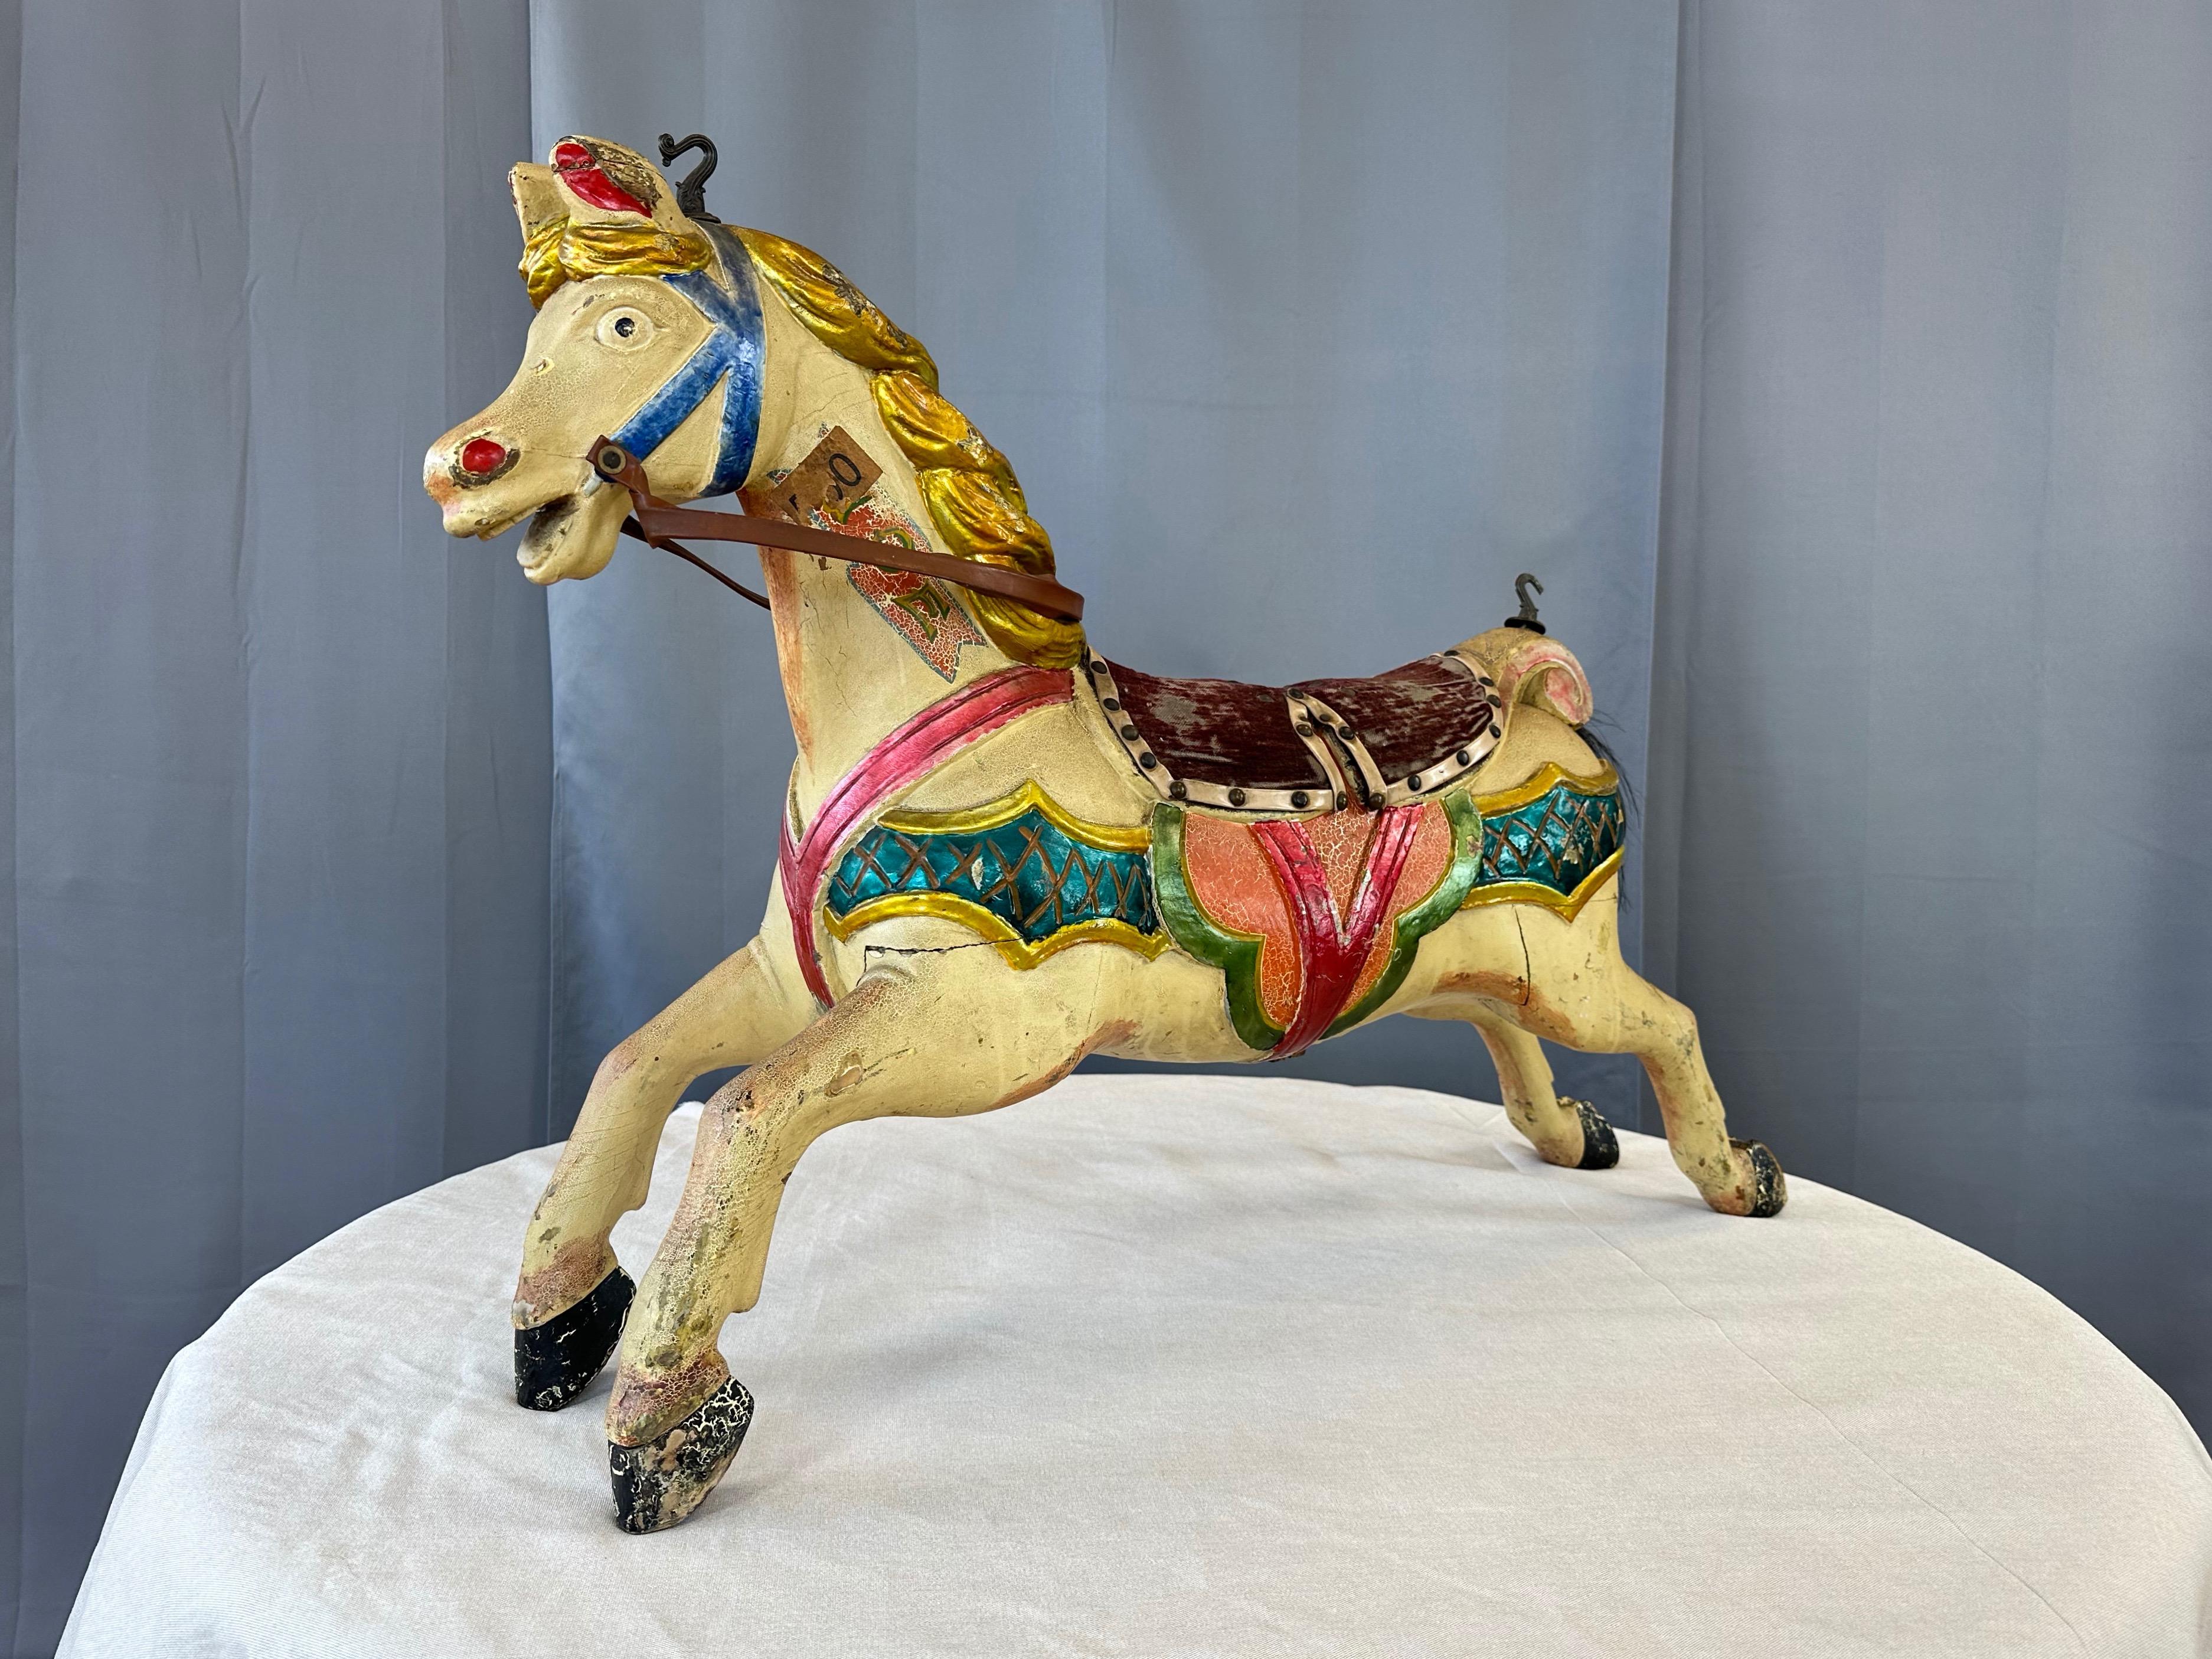 A very charming and colorful circa 1920 antique child’s wood carousel horse with polychrome finish, mohair saddle, and horse hair tail.

Putting the “merry” in “merry-go-round”, this child-size hand-carved wood carousel horse features a delightfully